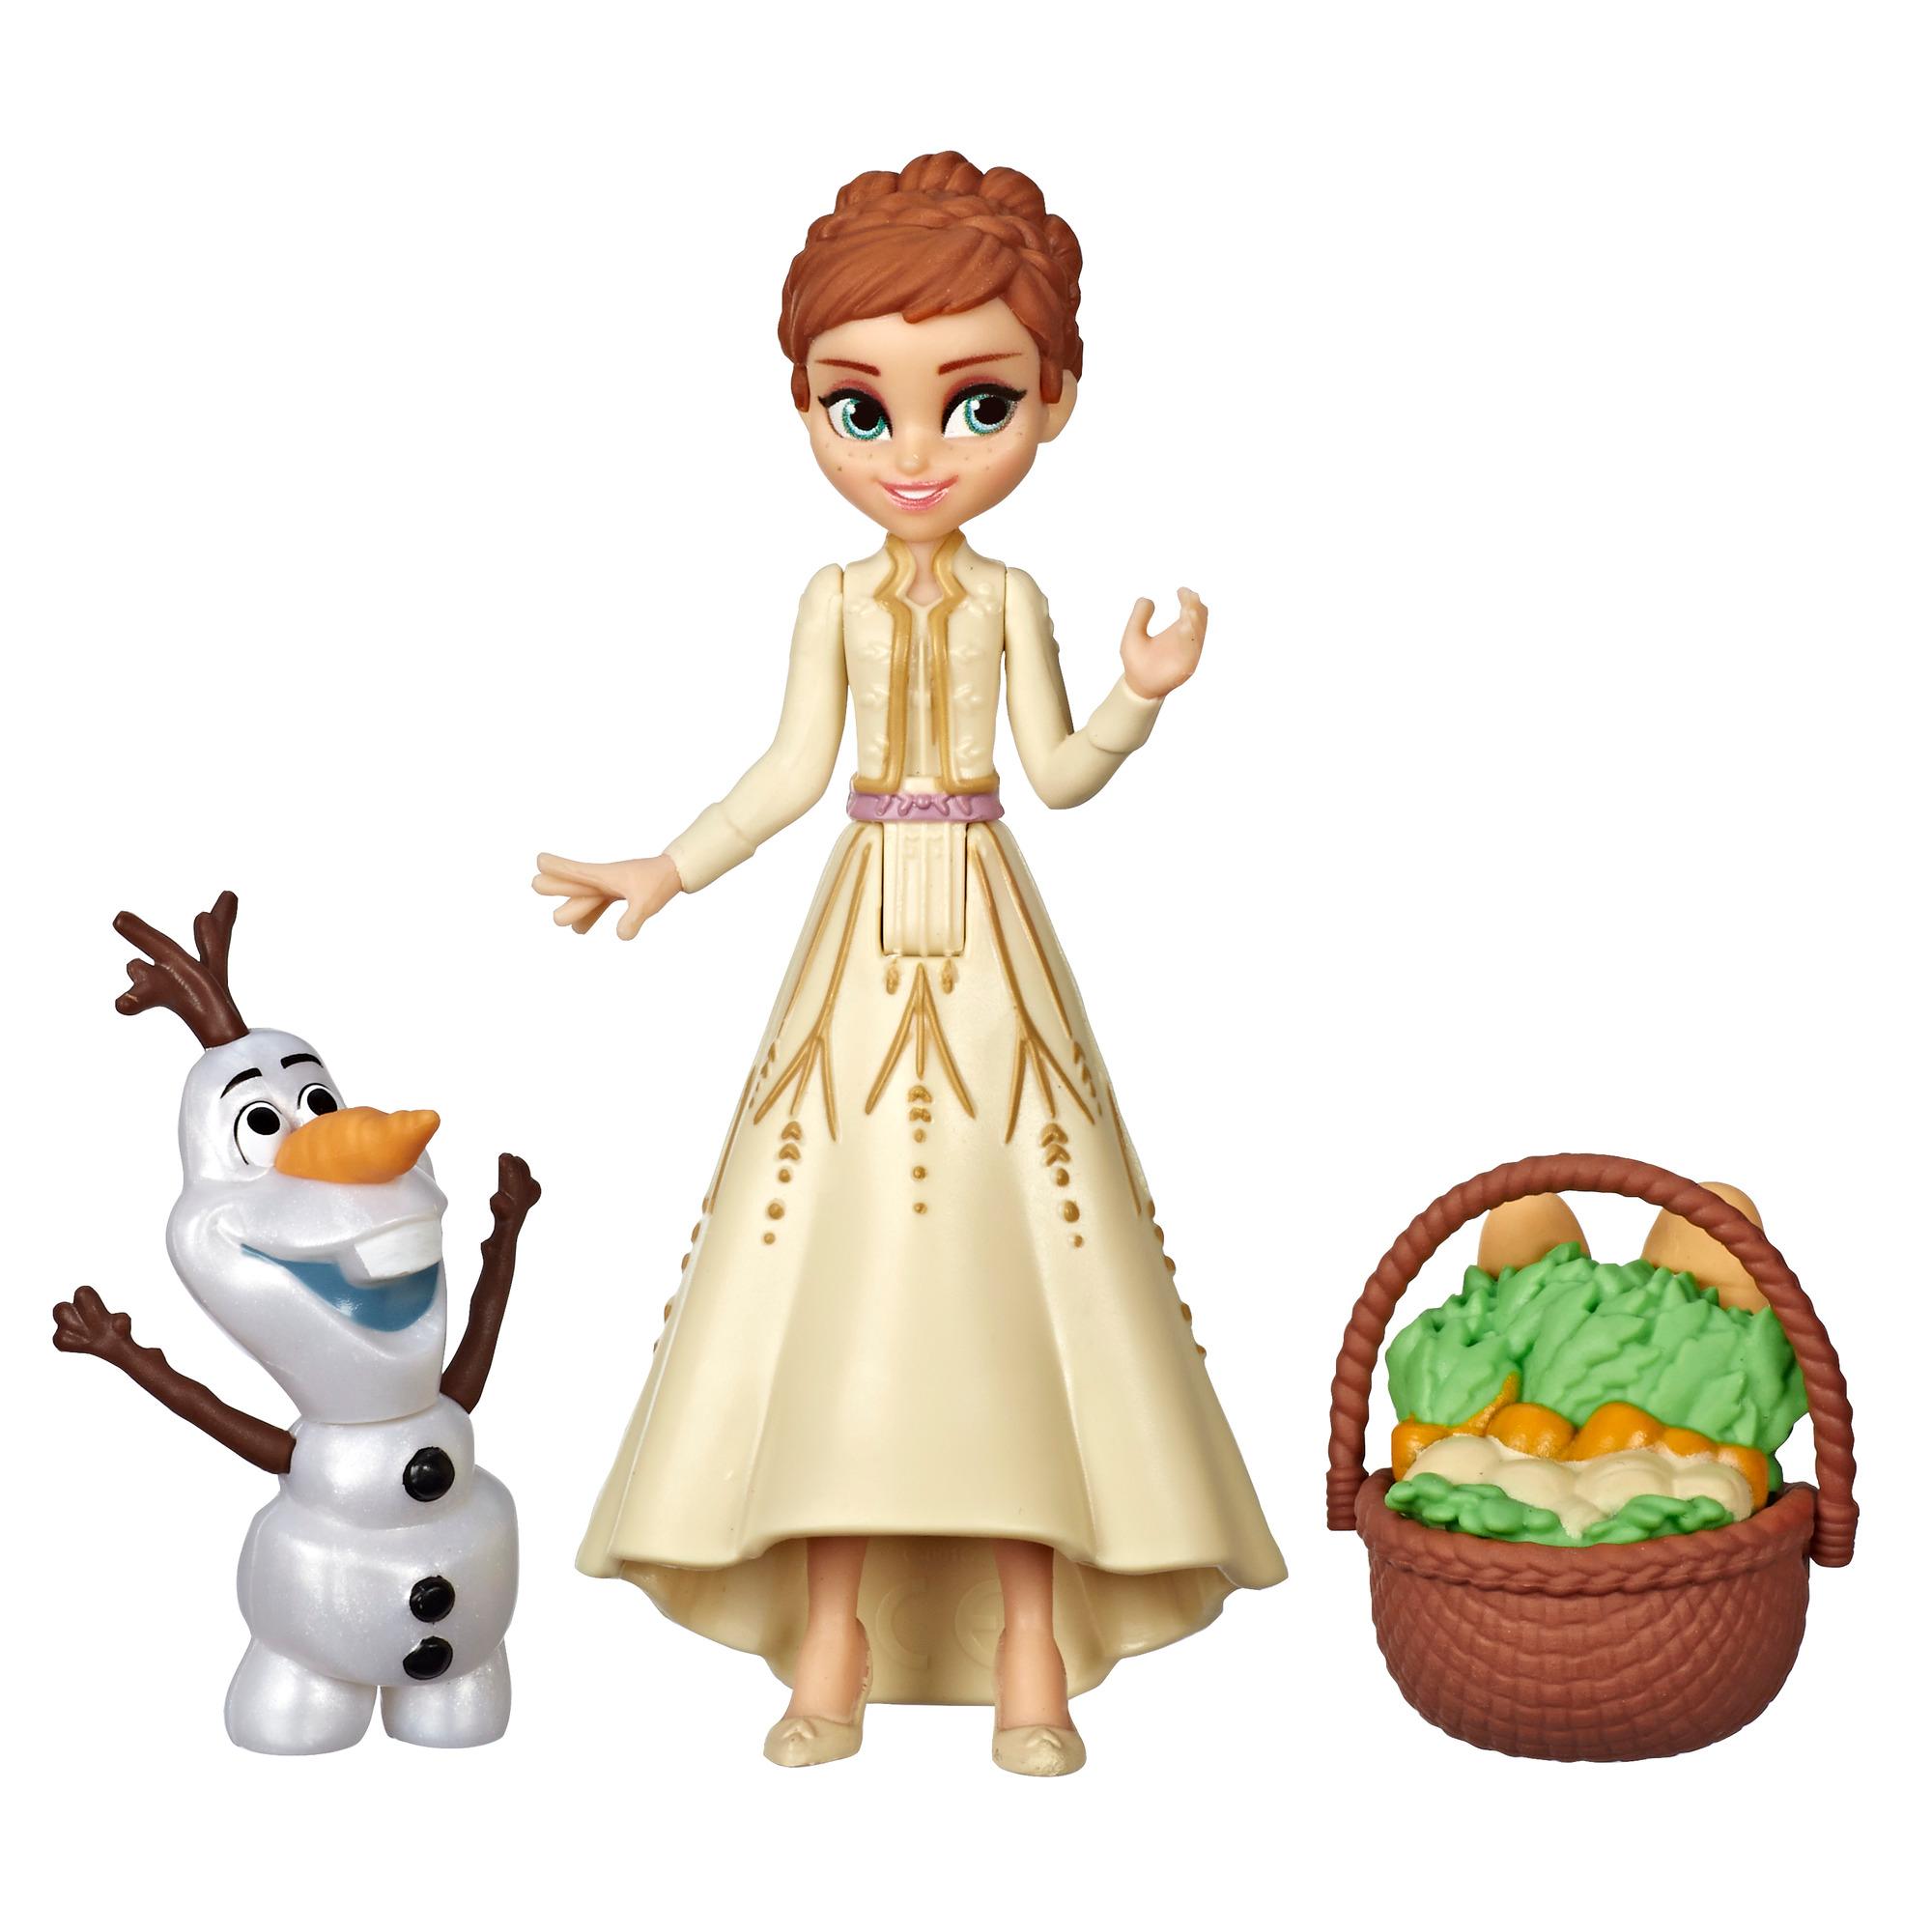 Disney Frozen Anna and Olaf Small Dolls With Basket Accessory, Inspired by the Disney Frozen 2 Movie